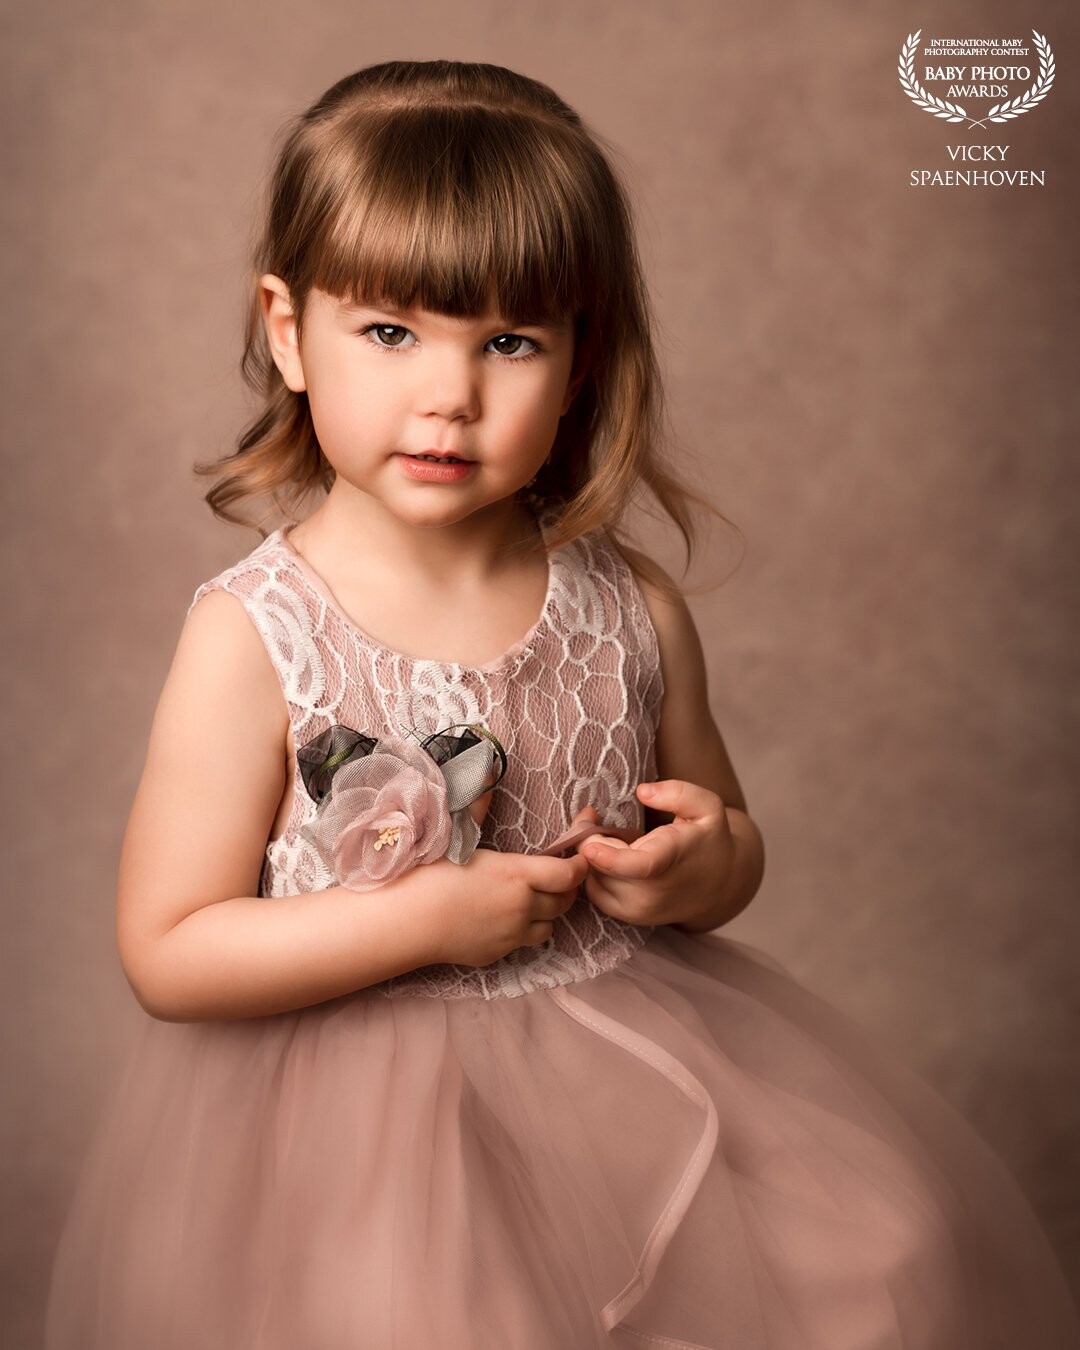 My youngest daughter Maëlle, almost 4 years old. I’d love to make a studio portrait of my kids once and a while. It’s so great to see their growth through the years. And I love her innocent expression in this image.